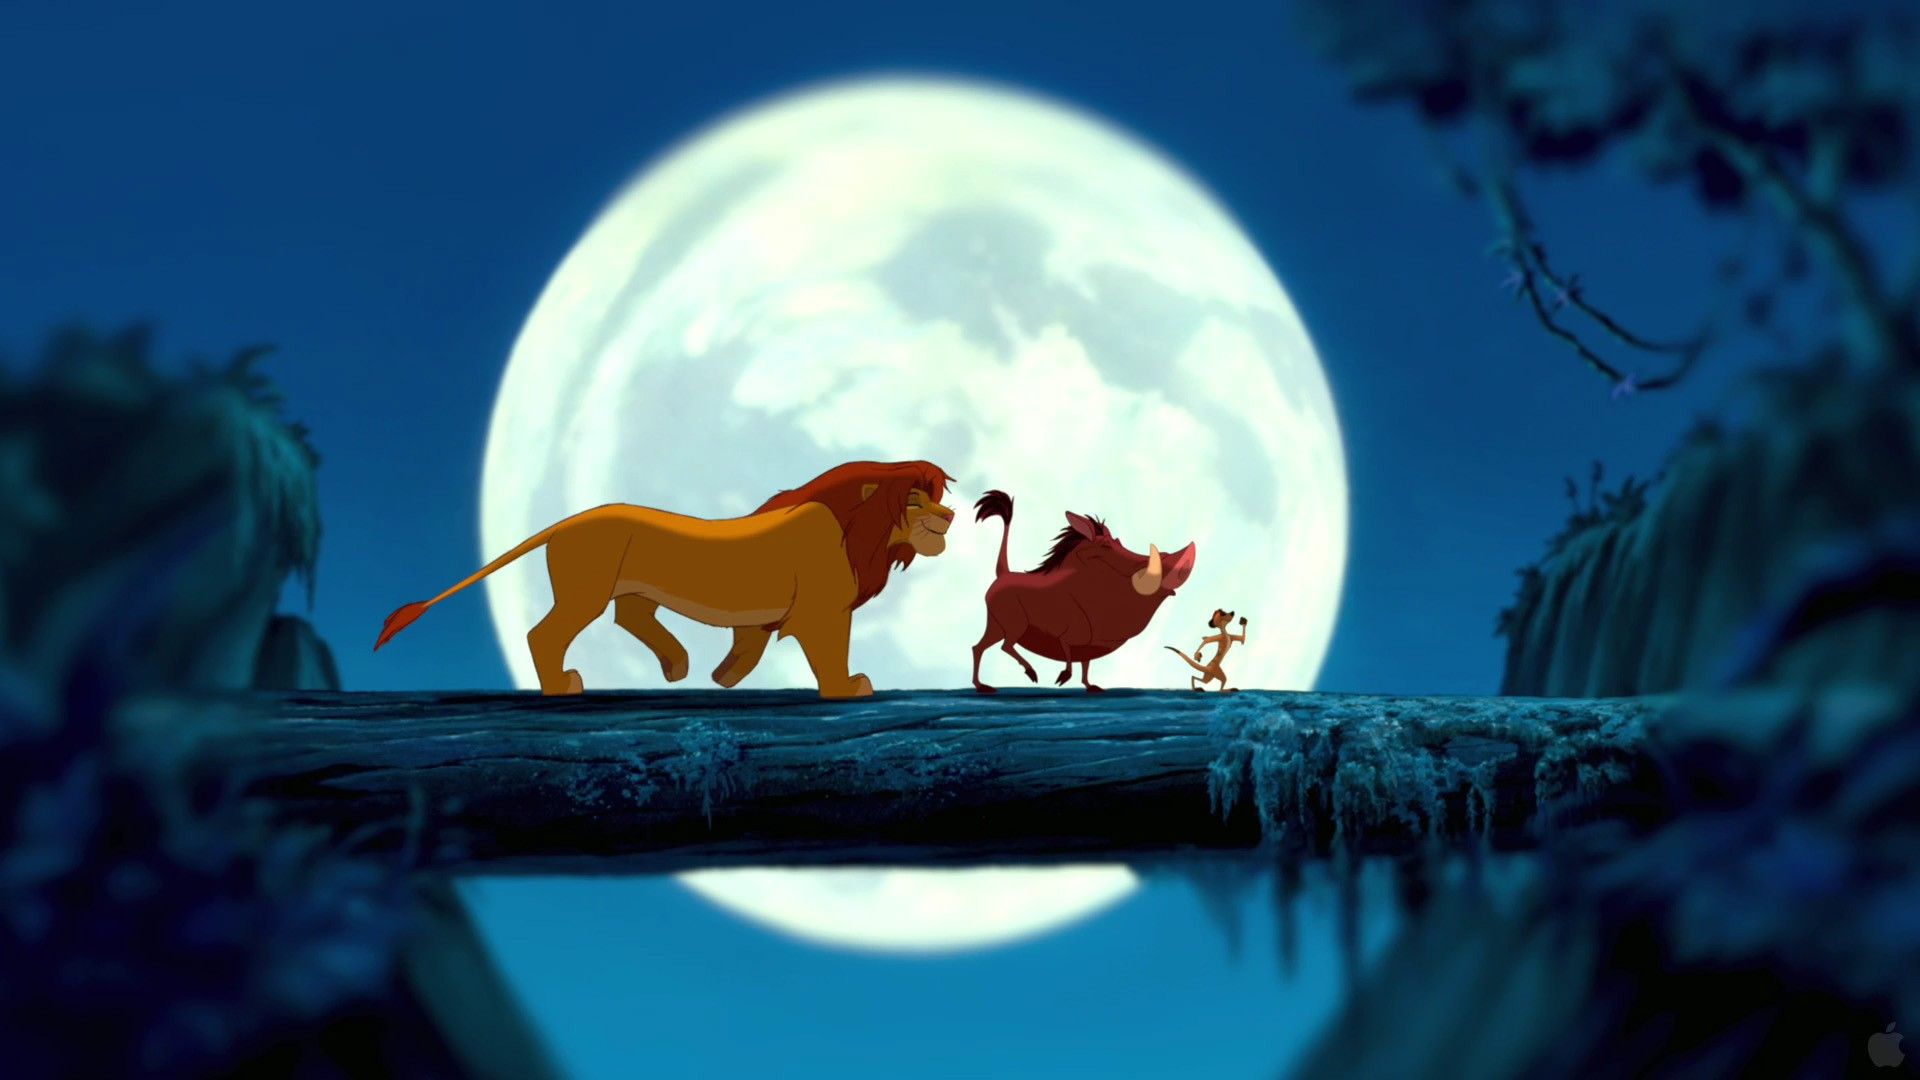 The lion king hd wallpaper - The Lion King